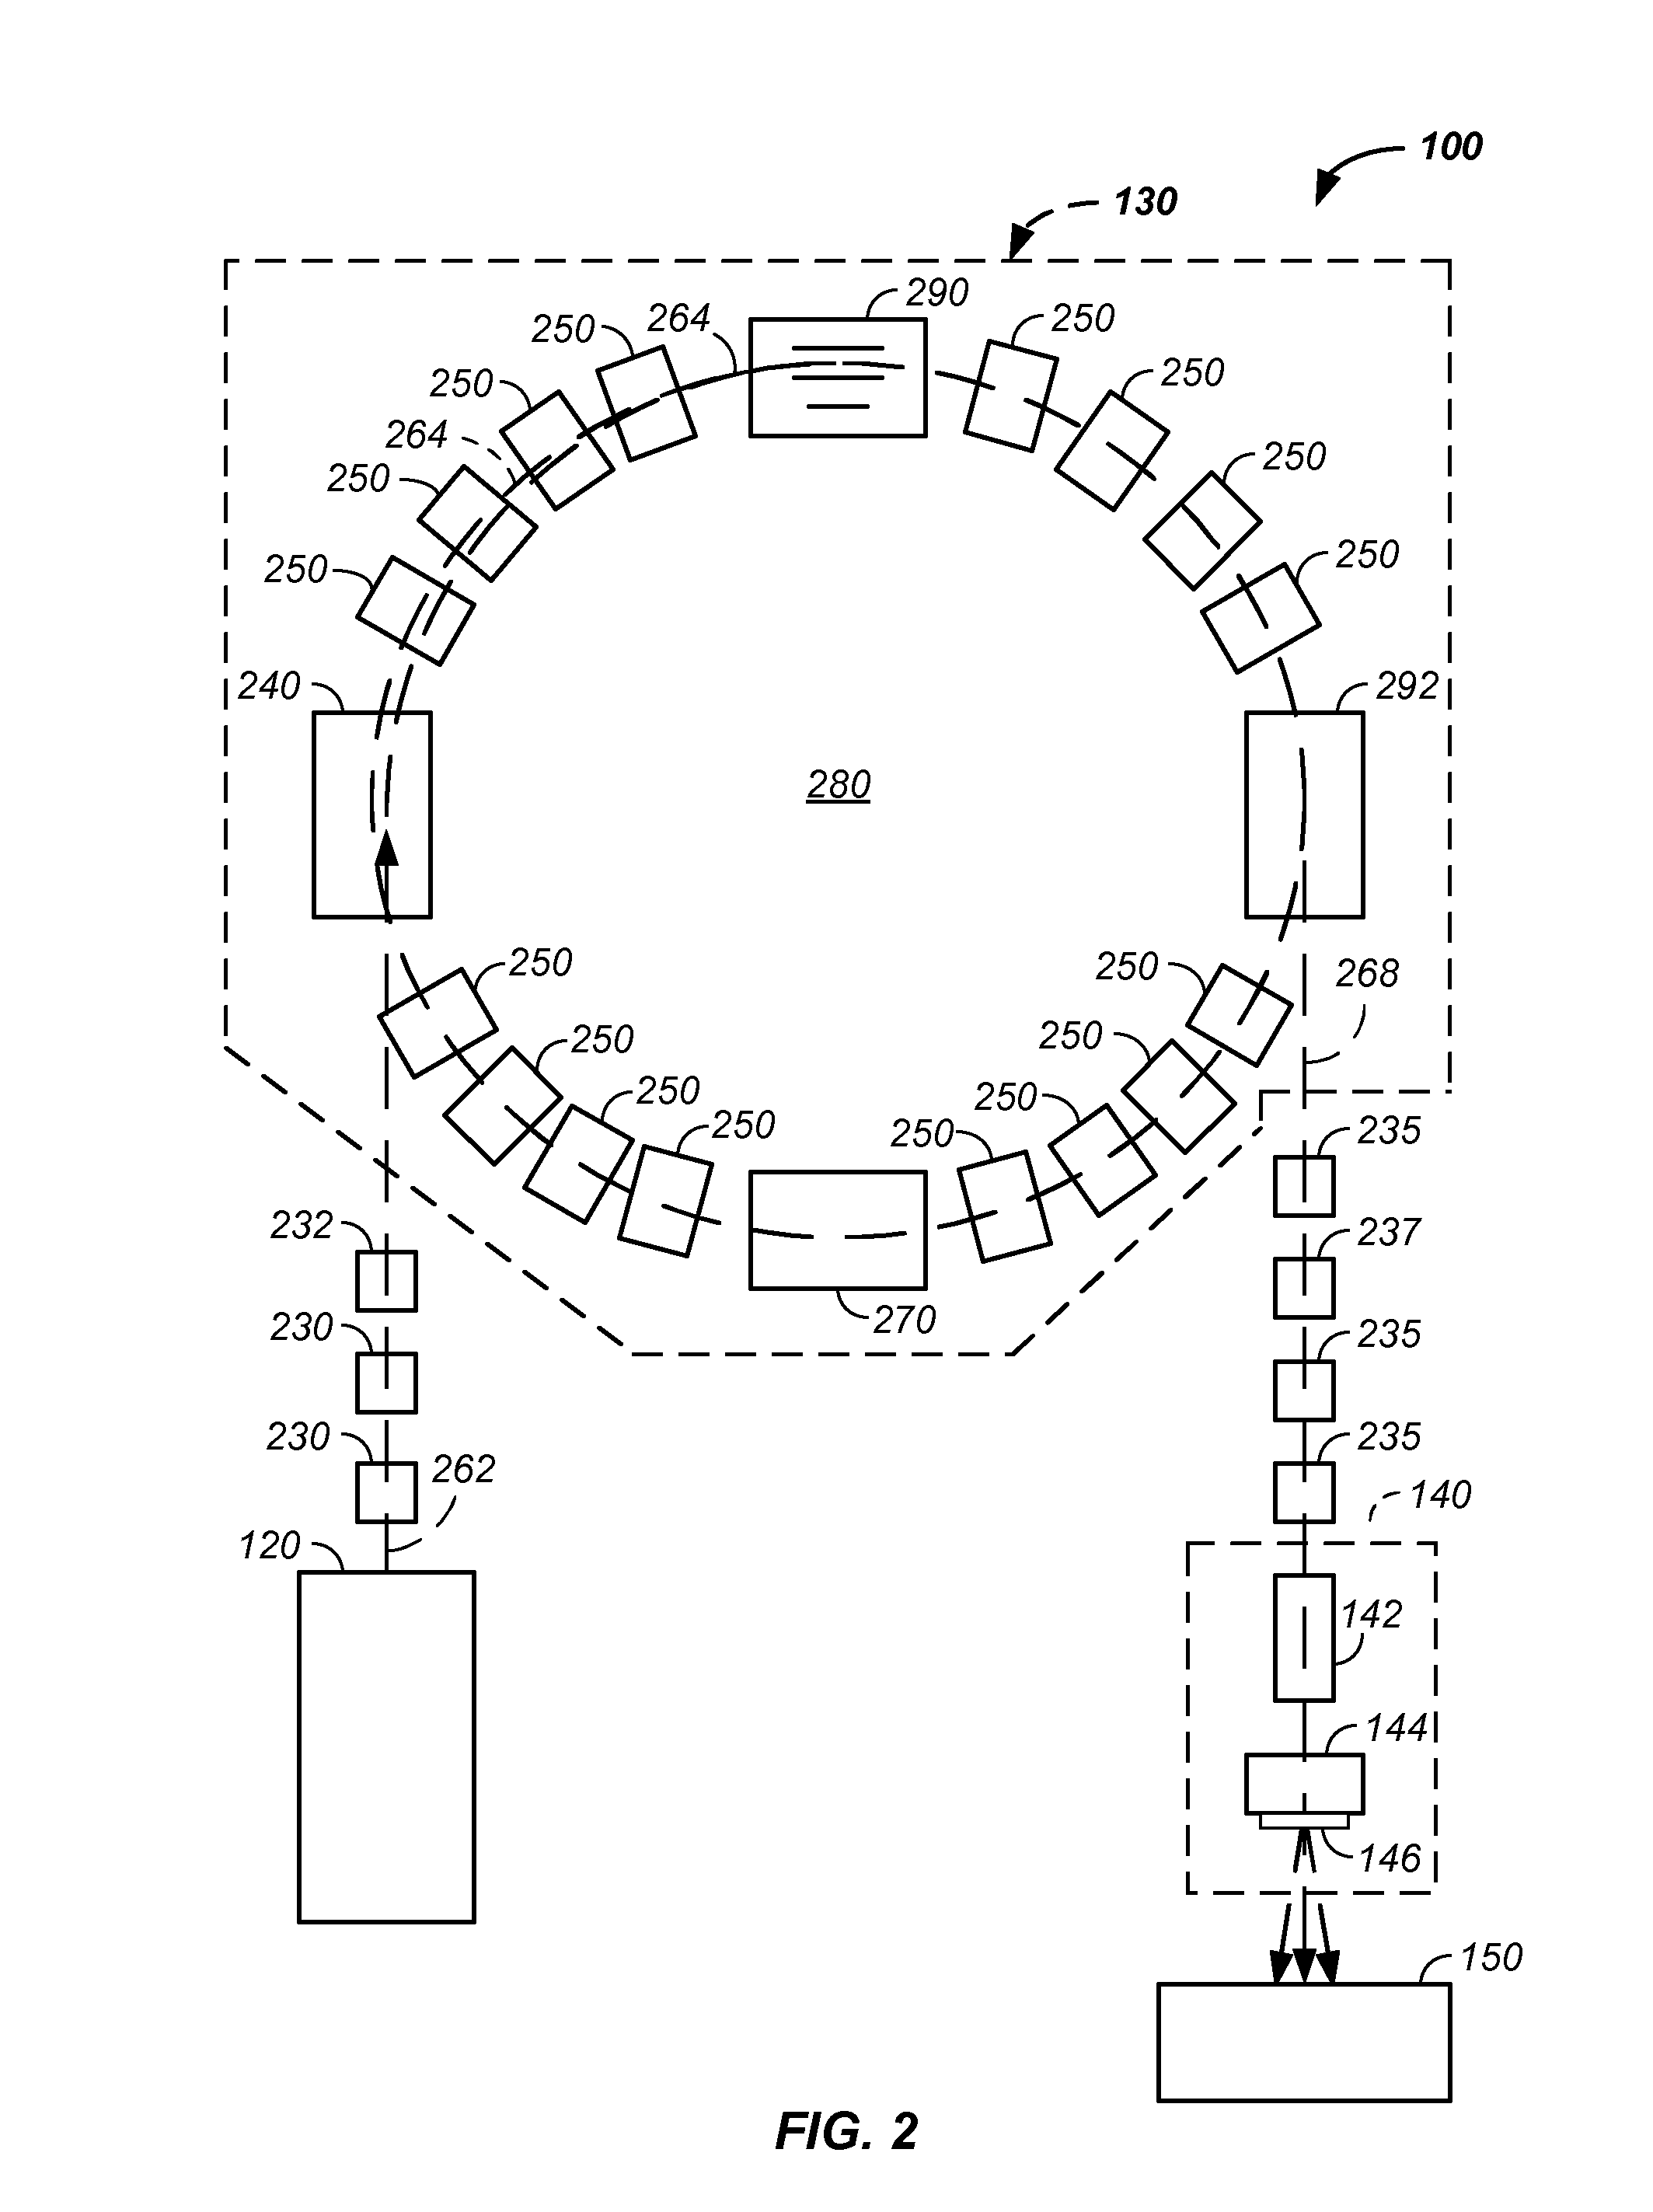 X-ray tomography method and apparatus used in conjunction with a charged particle cancer therapy system